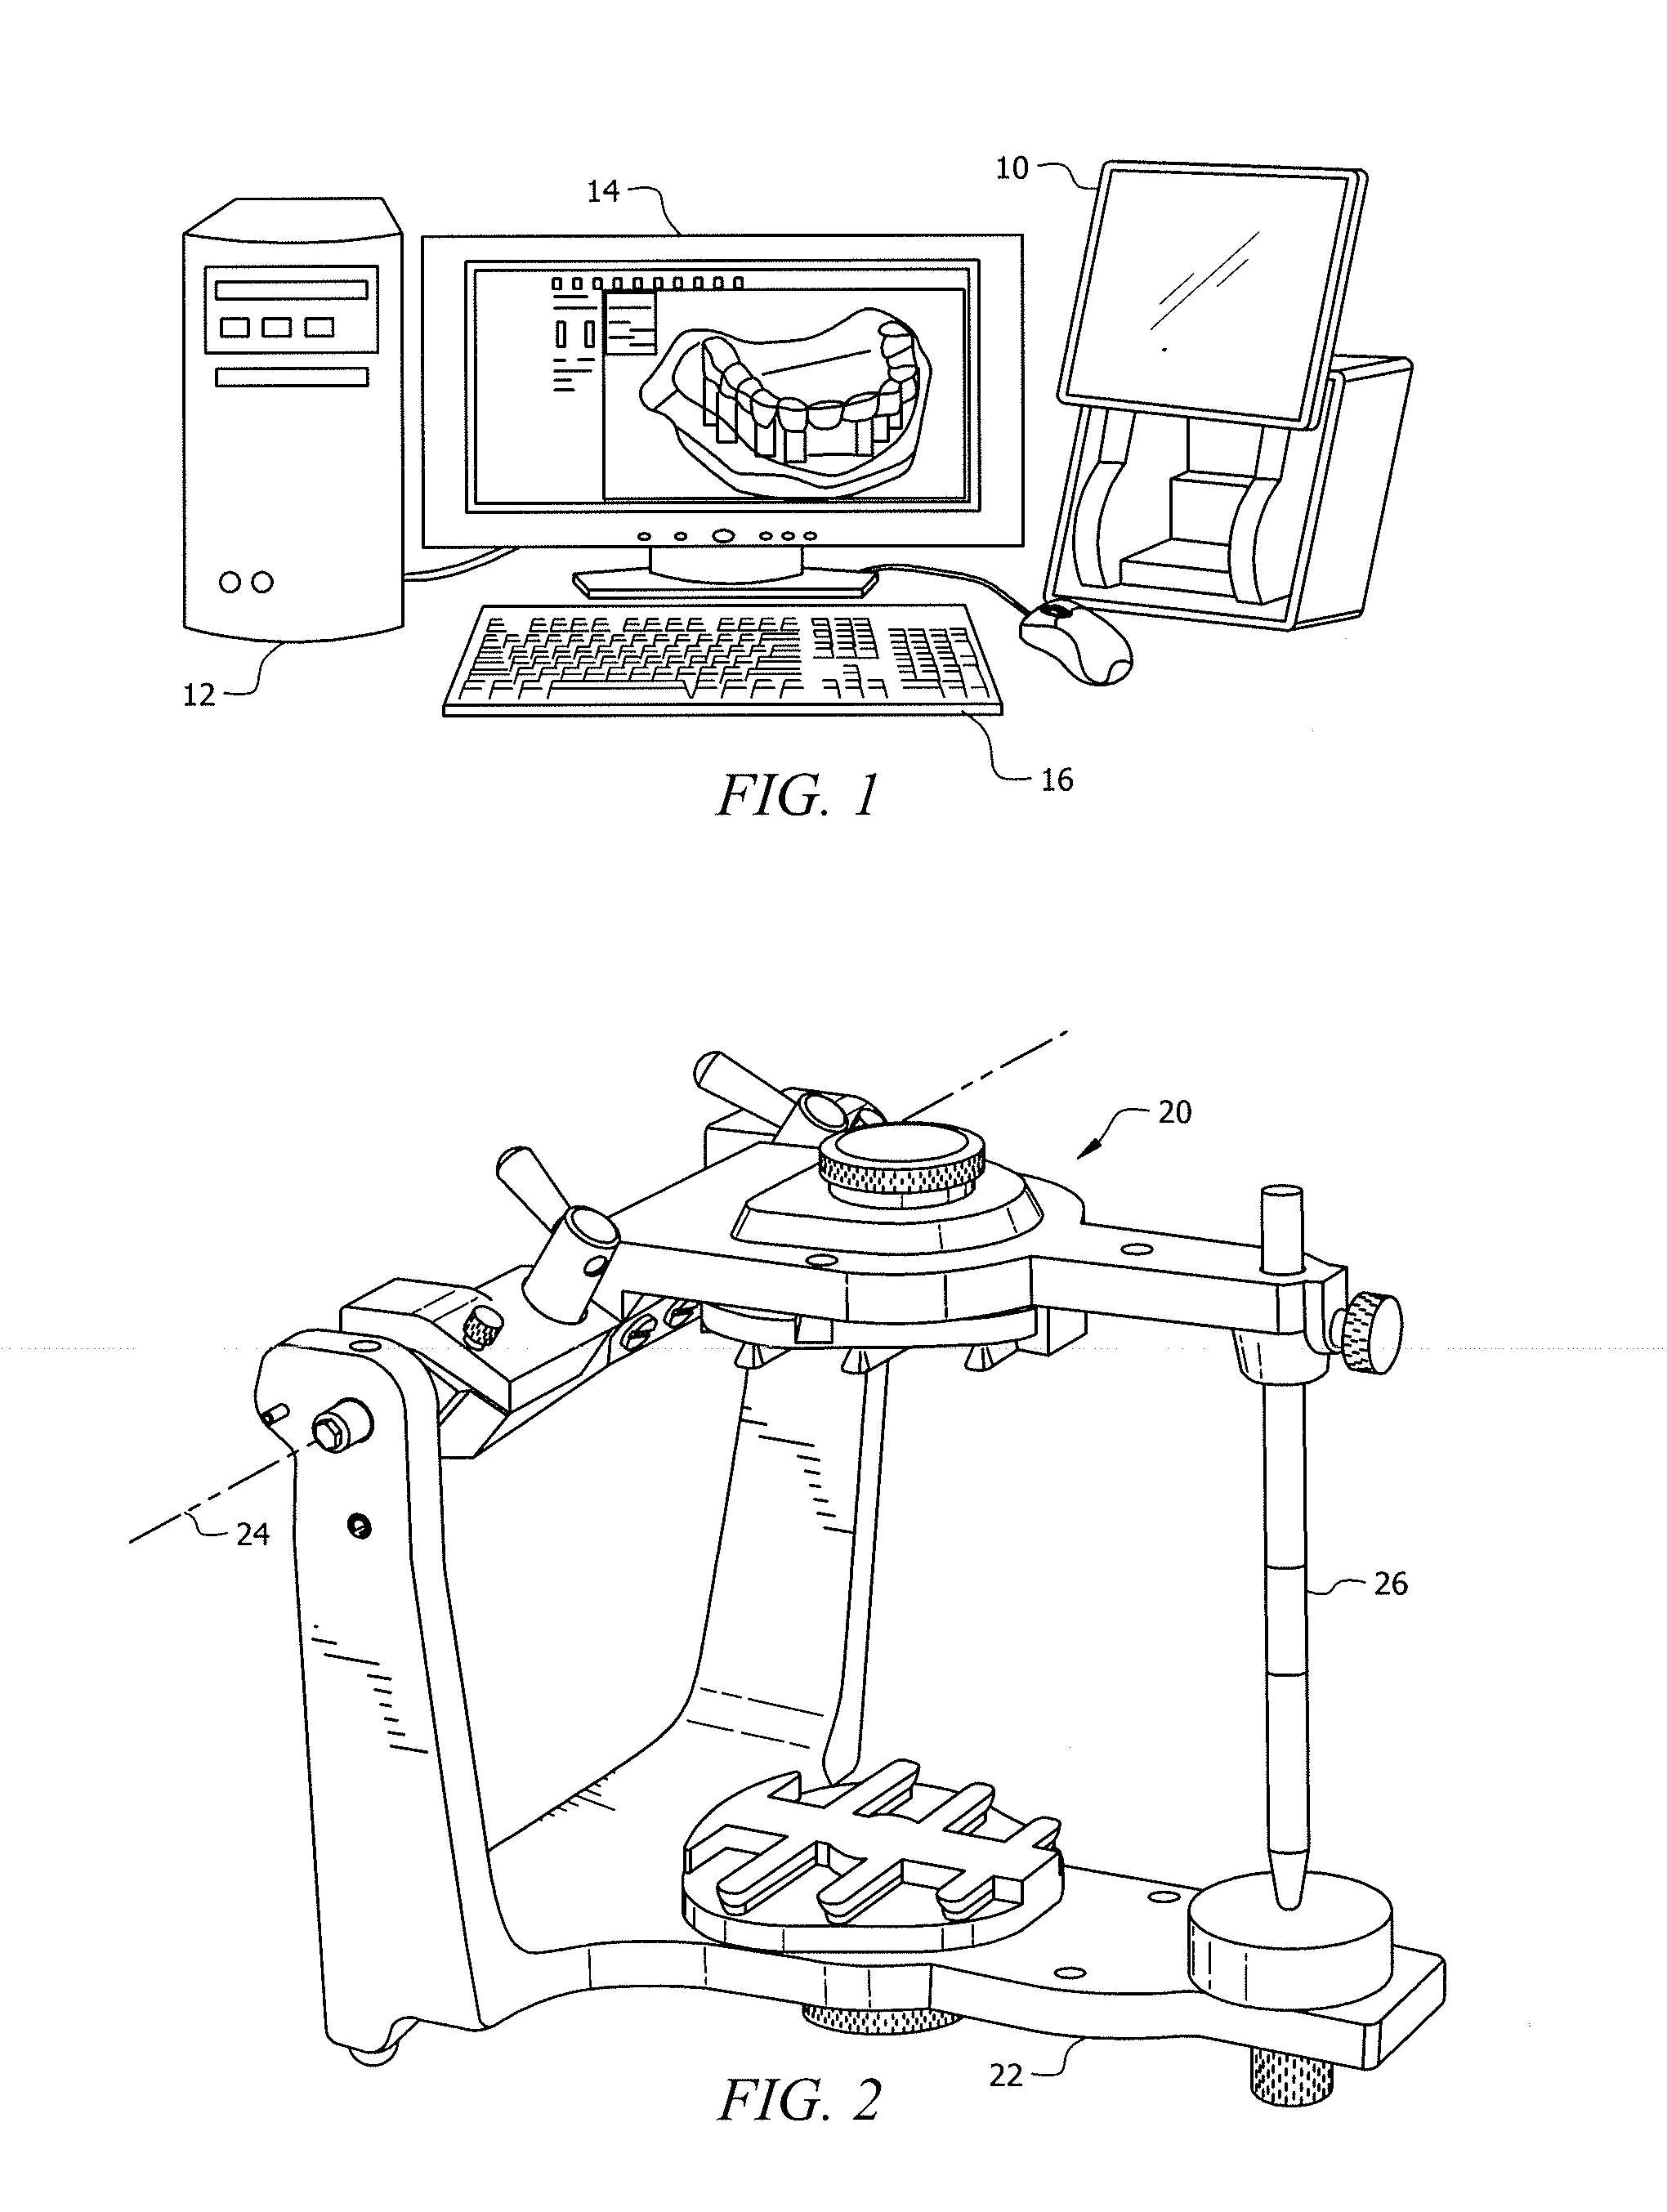 Method and apparatus for dental articulation